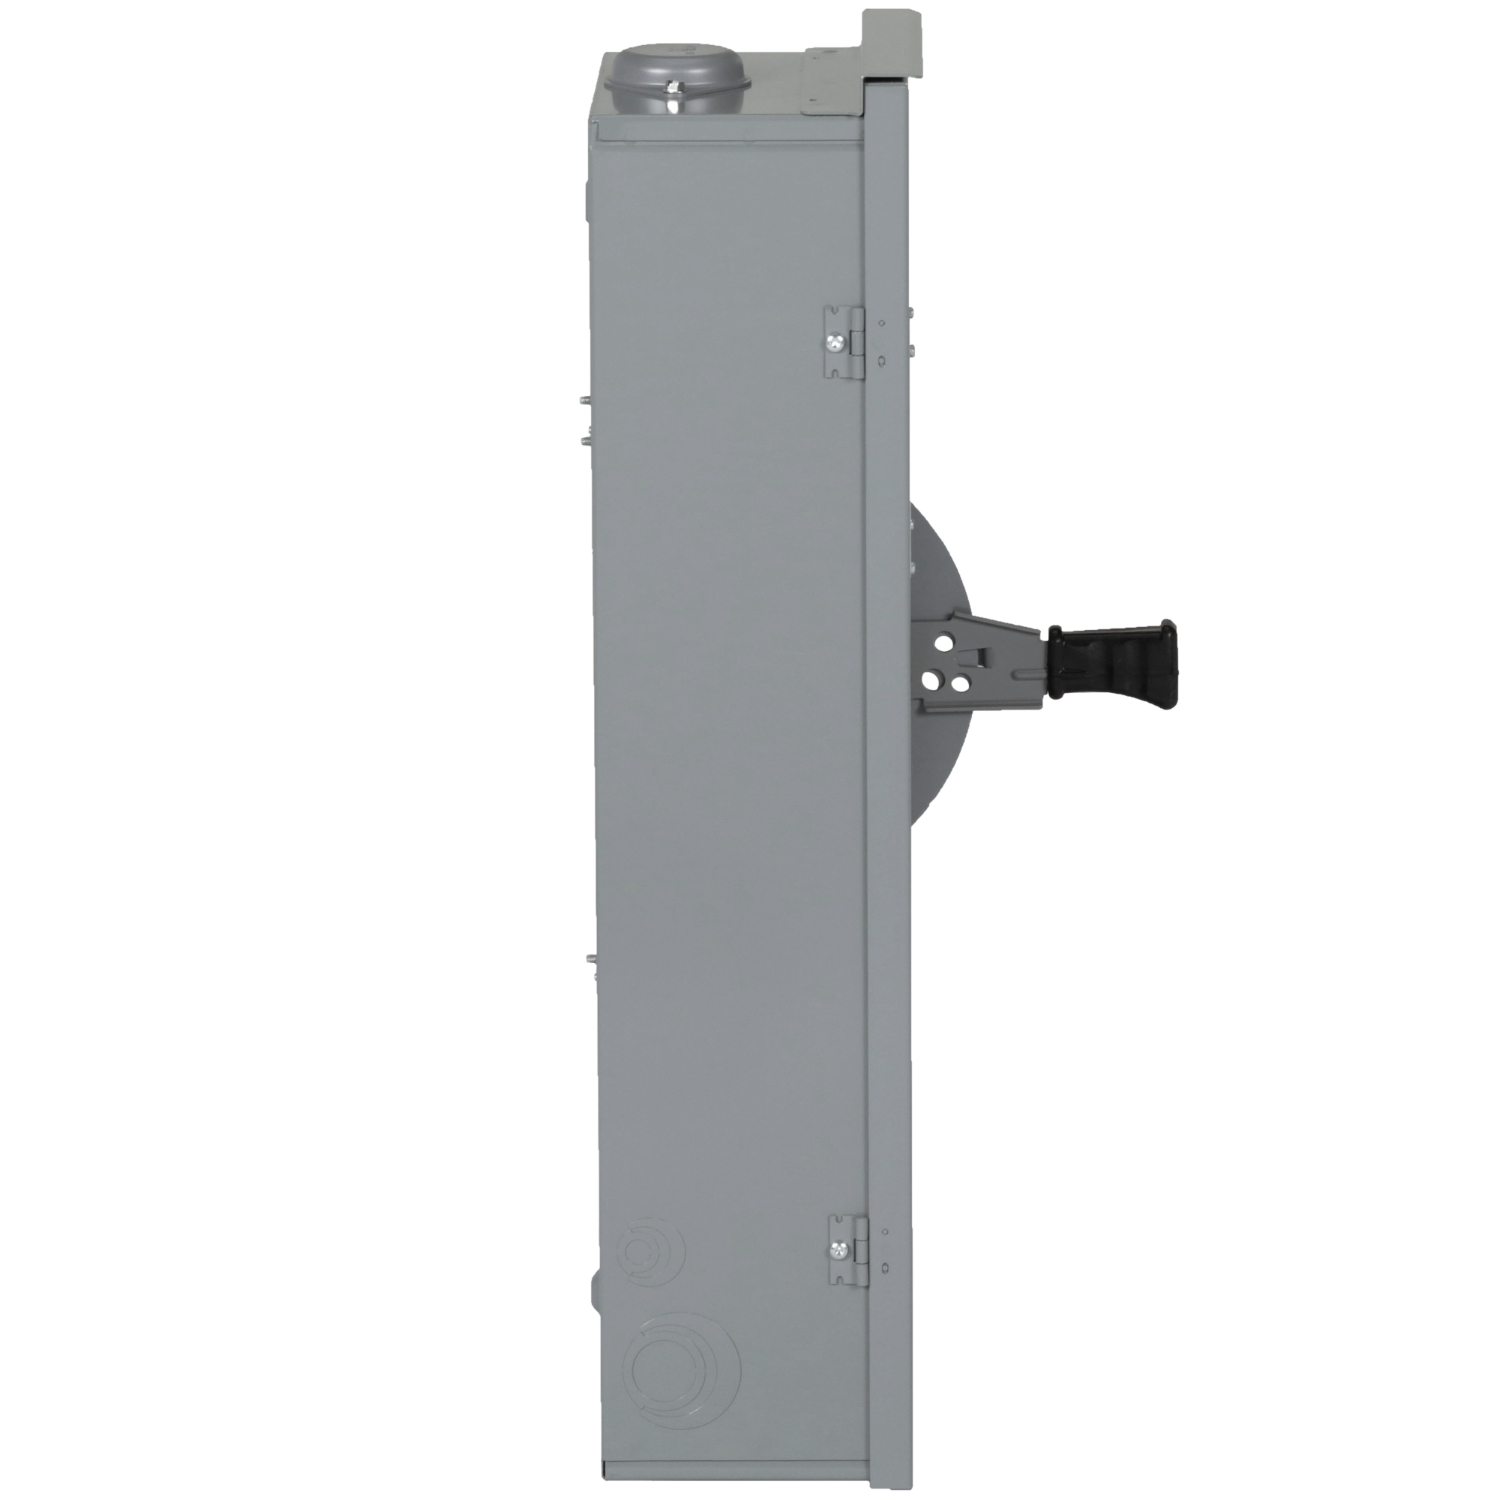 DTU361RB - Safety switch, double throw, non fusible, 30A, 600V, 3 pole,  30HP, NEMA 3R, bolt on provision